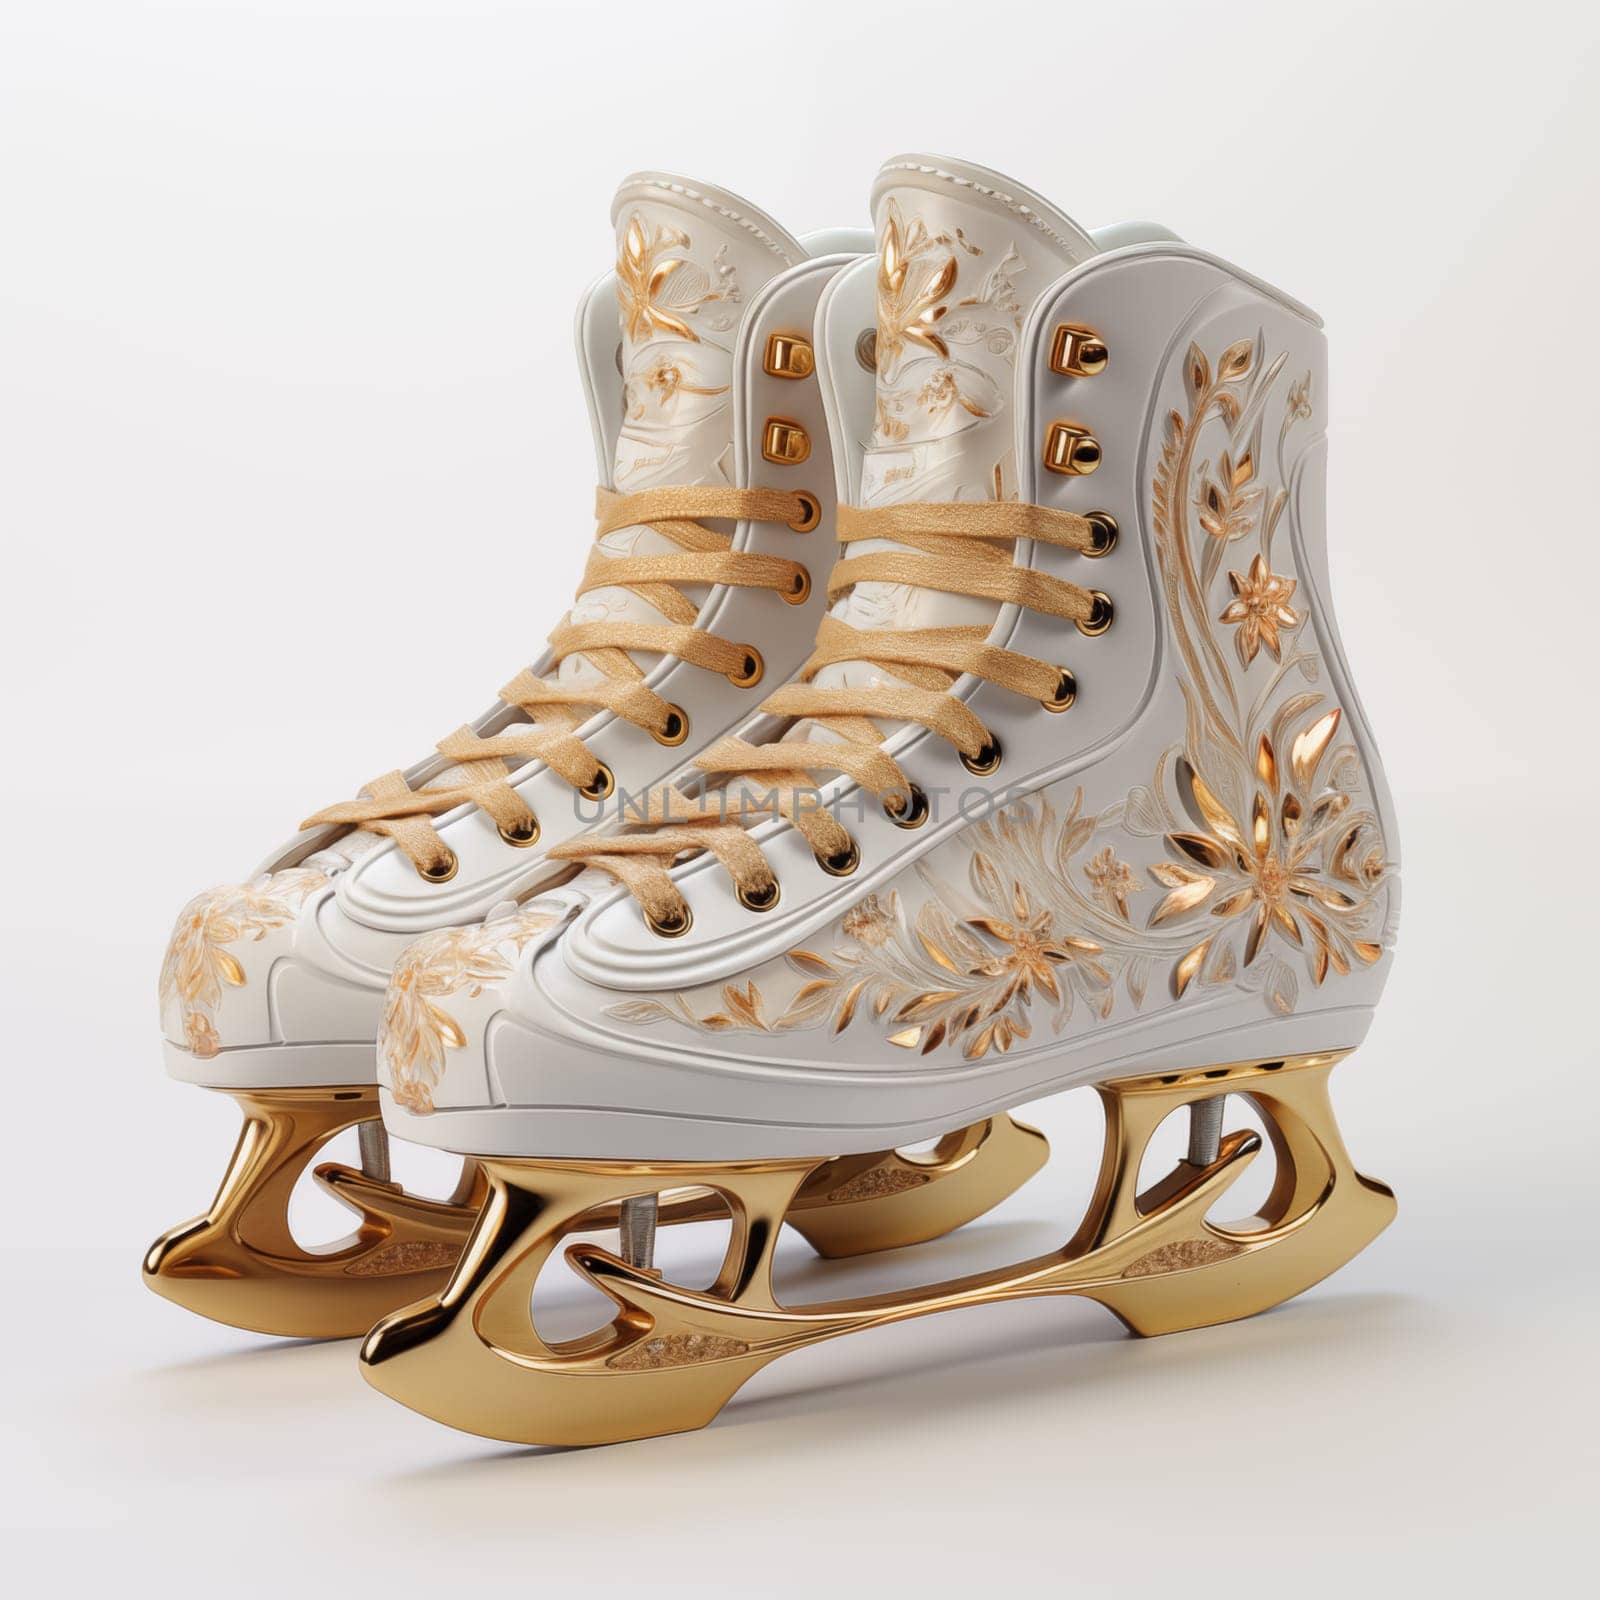 Luxurious, white with gold pattern, ice skates, standing isolated on white background.